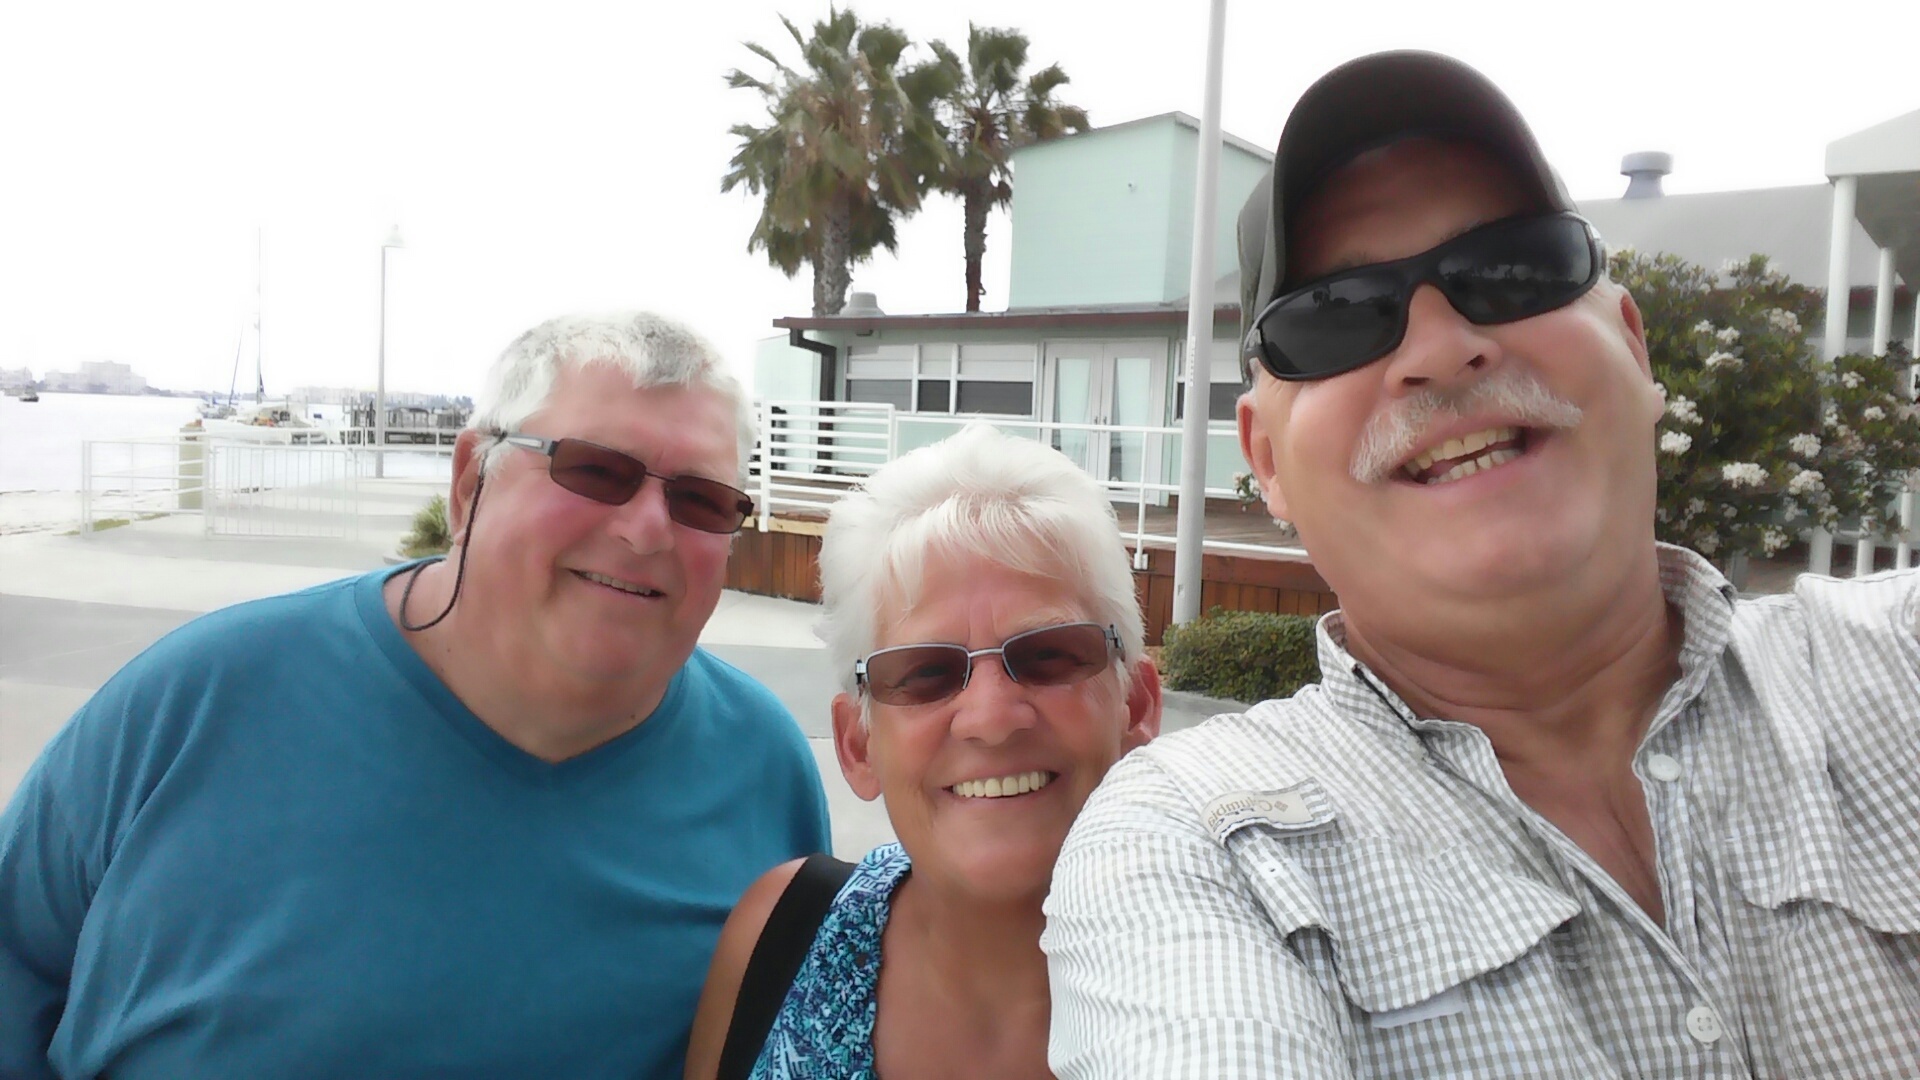 Jürgen Wittmann with  Gaby and Engelbert  We meet us 2016 at Gulfport-St. Petersburg<br />
We like to think back to Jürgen. If it was possible at all, we visited each other when we were on vacation in Florida. We remember his friendly manner and his laughter. We'll miss him. <br />
Gaby and Engelbert Wiedmann from Germany